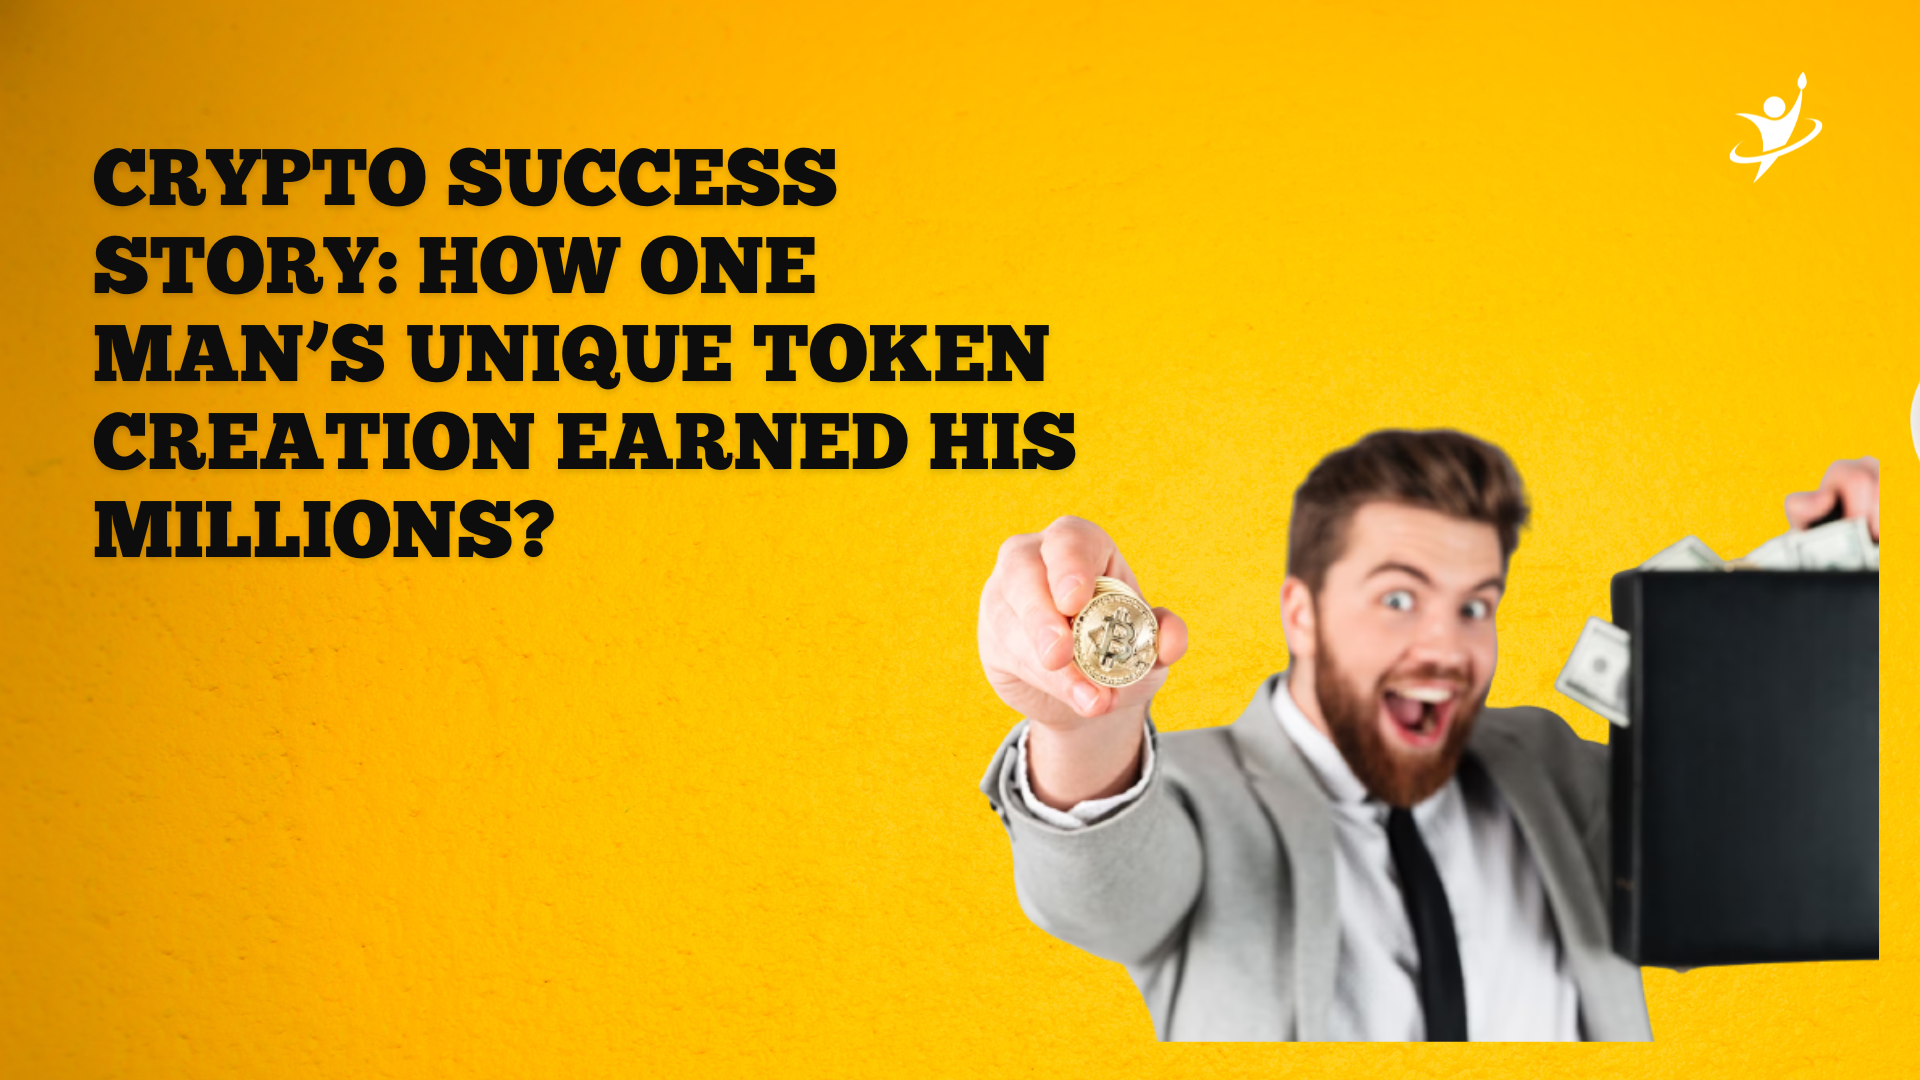 Crypto Success Story: How One Man’s Unique Token Creation Earned His Millions?